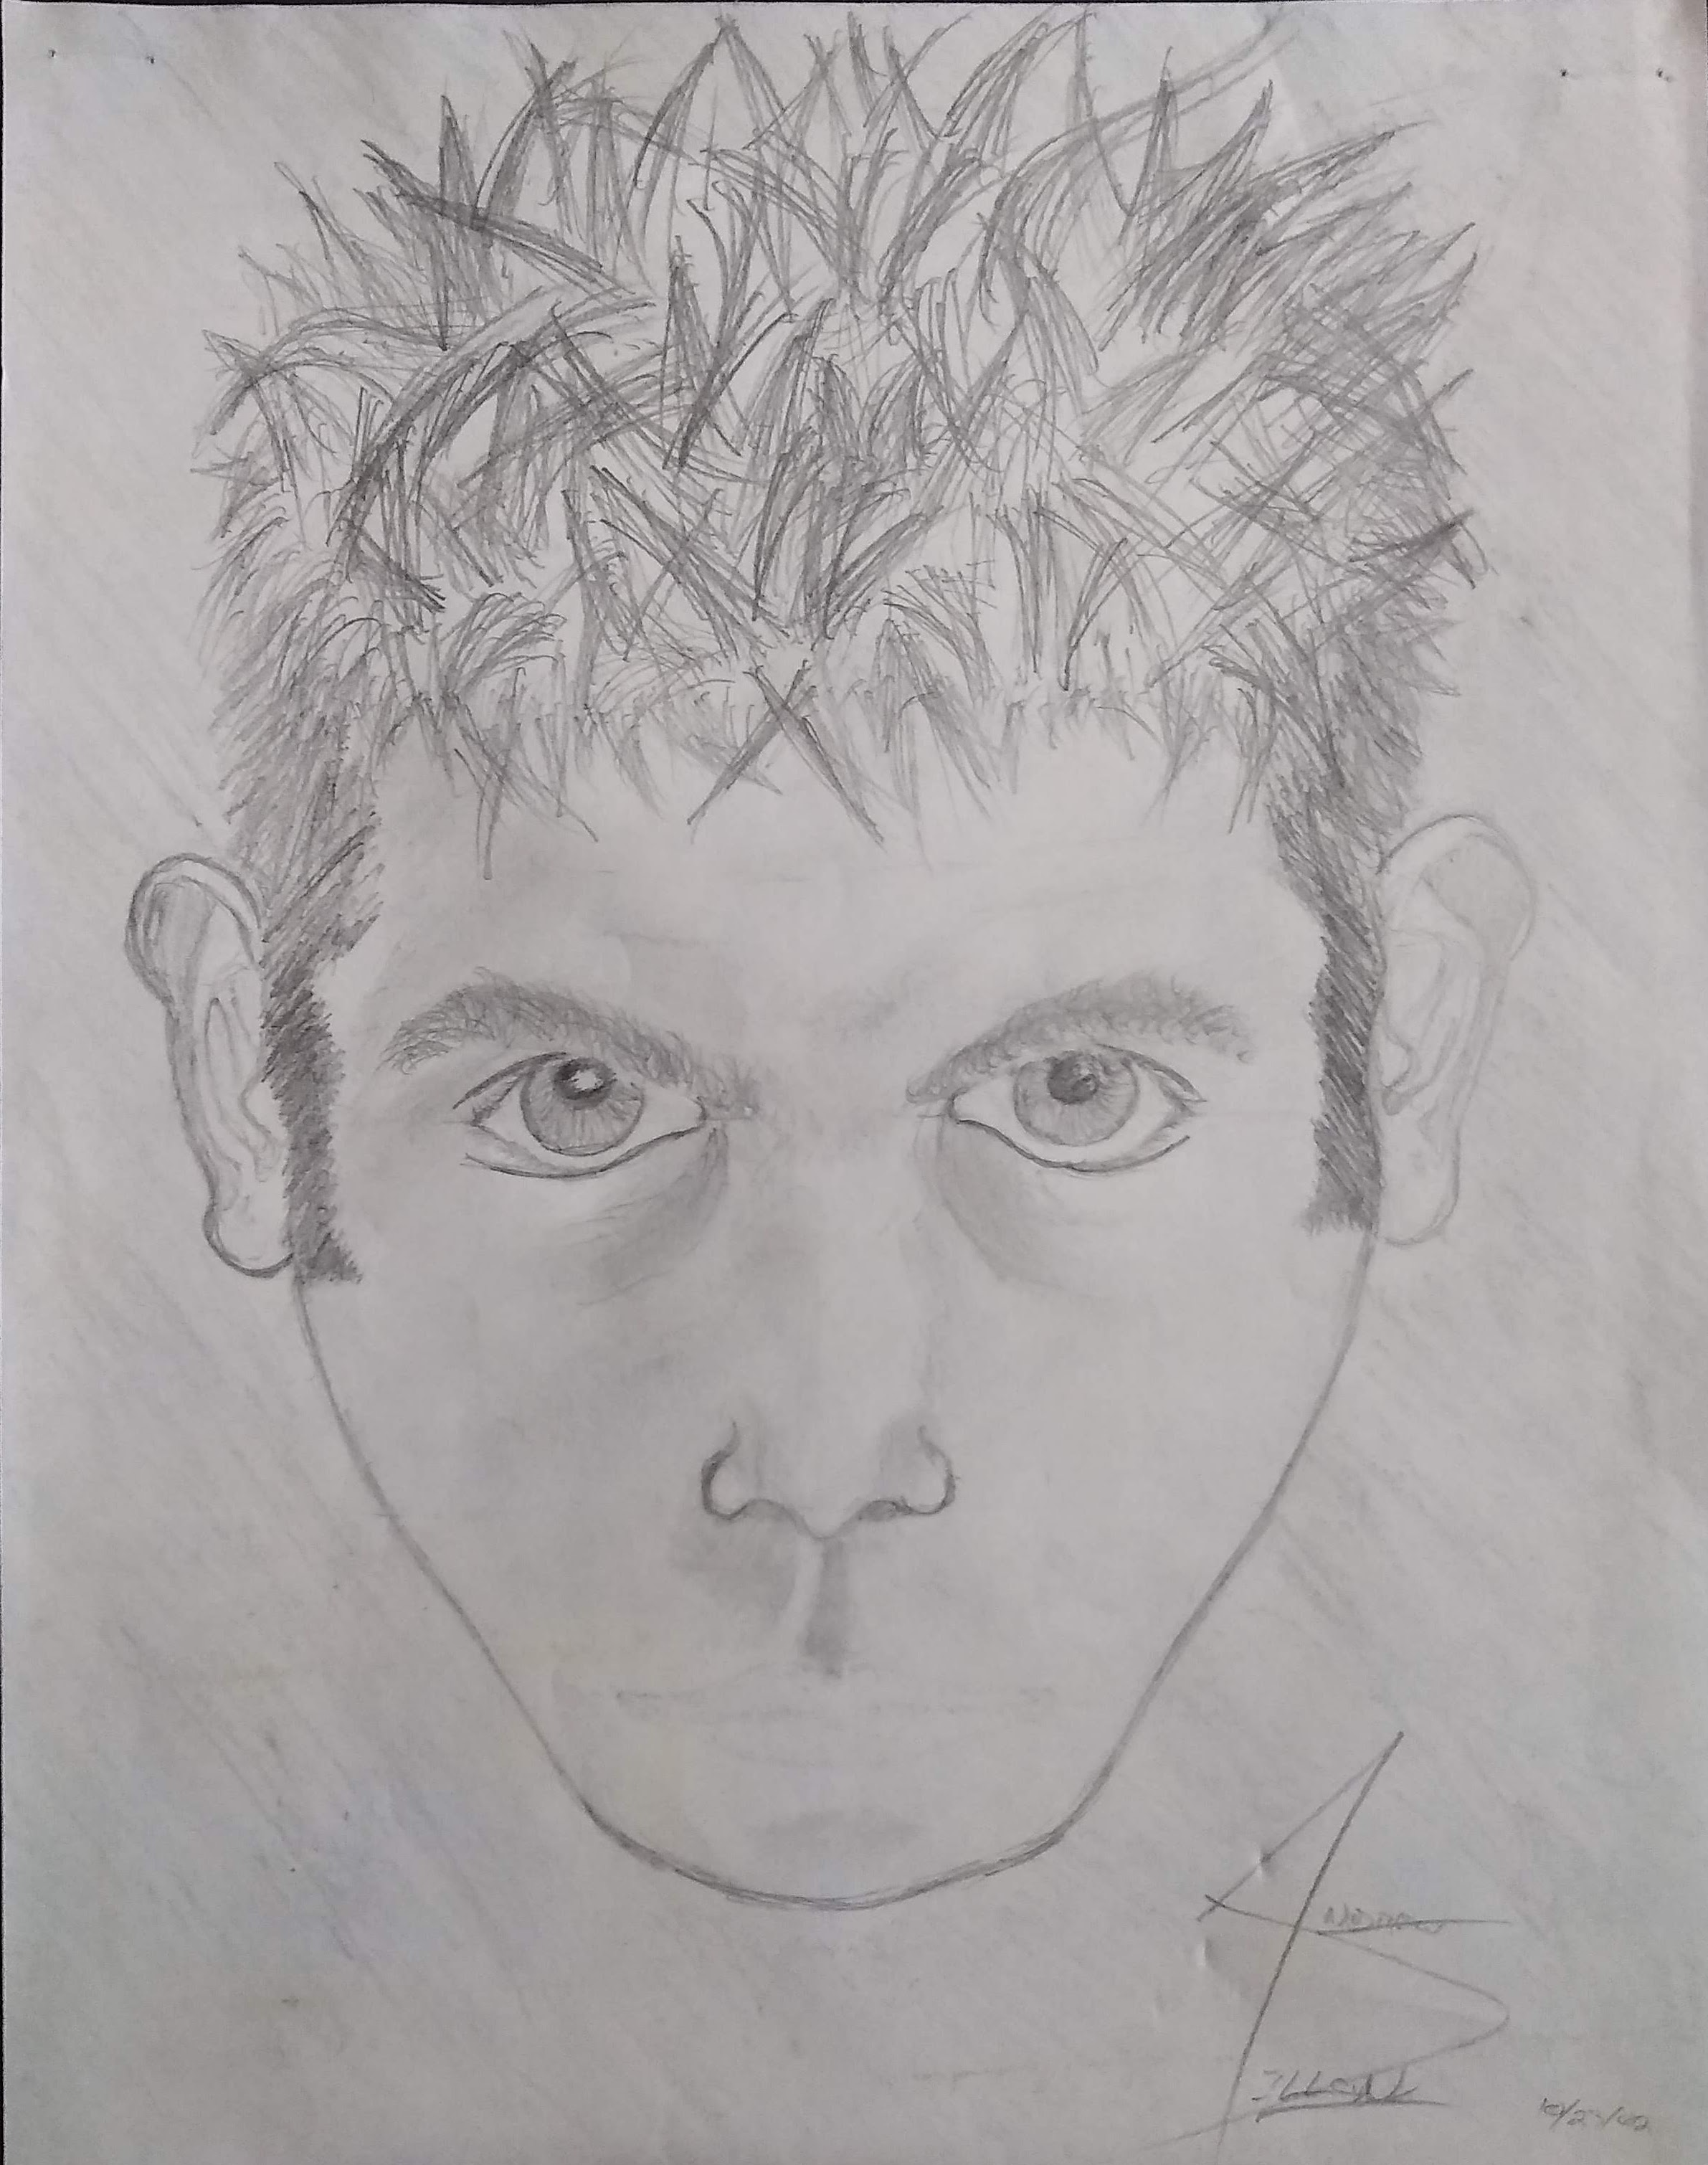 An unfinished self-sketch (in pencil) of the author at seventeen years old. The mouth was never completed, but you can see the pentimento of early attempts.